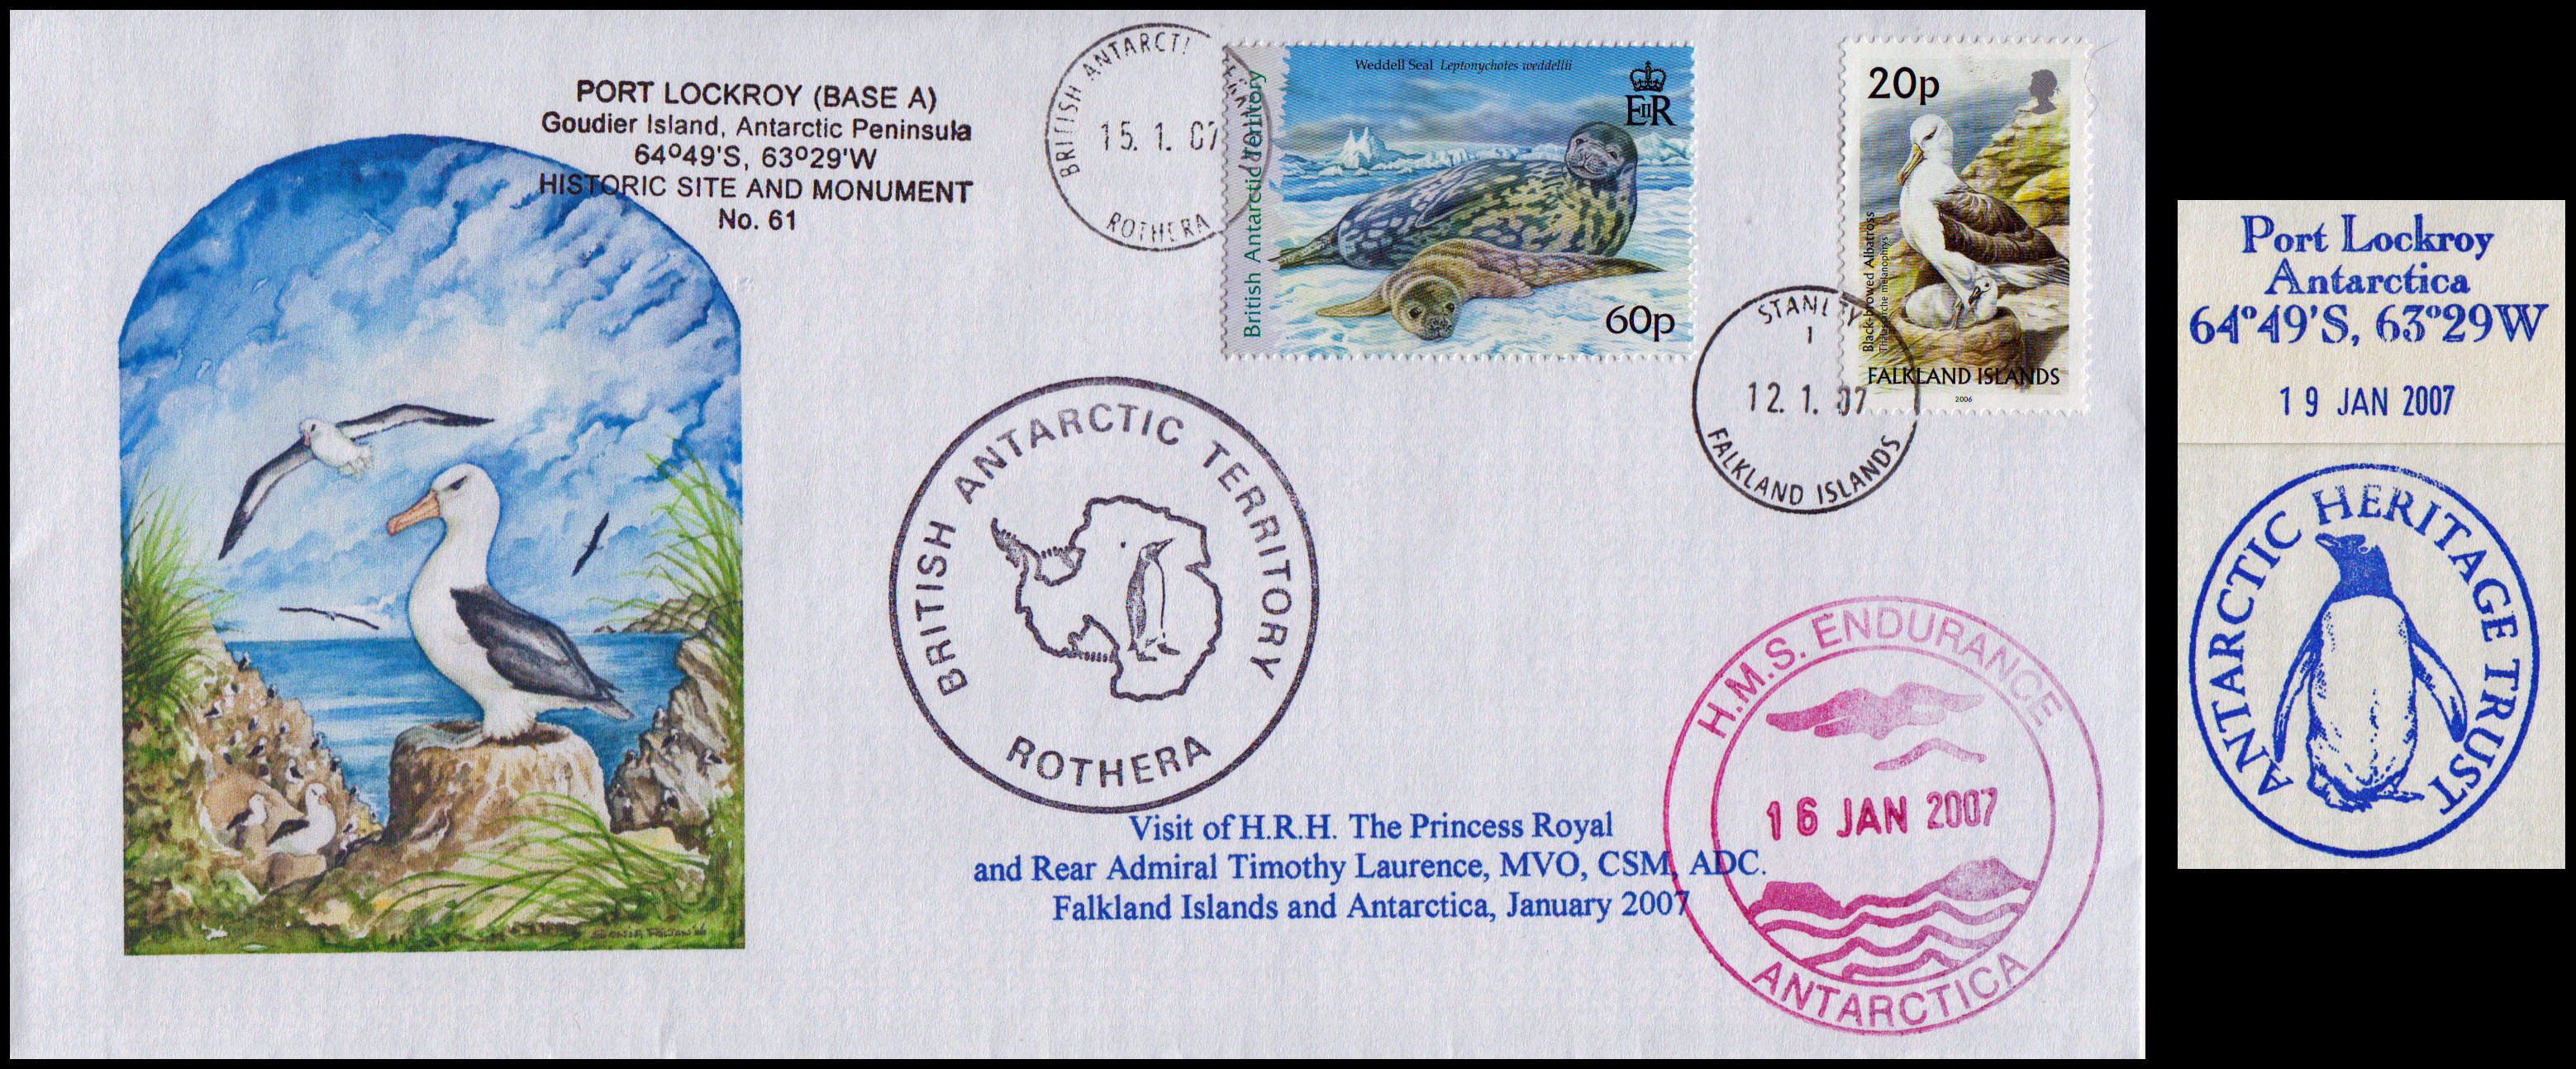 Visit of the Princess Royal to Antarctica. The cover was flown from Stanley to Rothera on the Dash 7